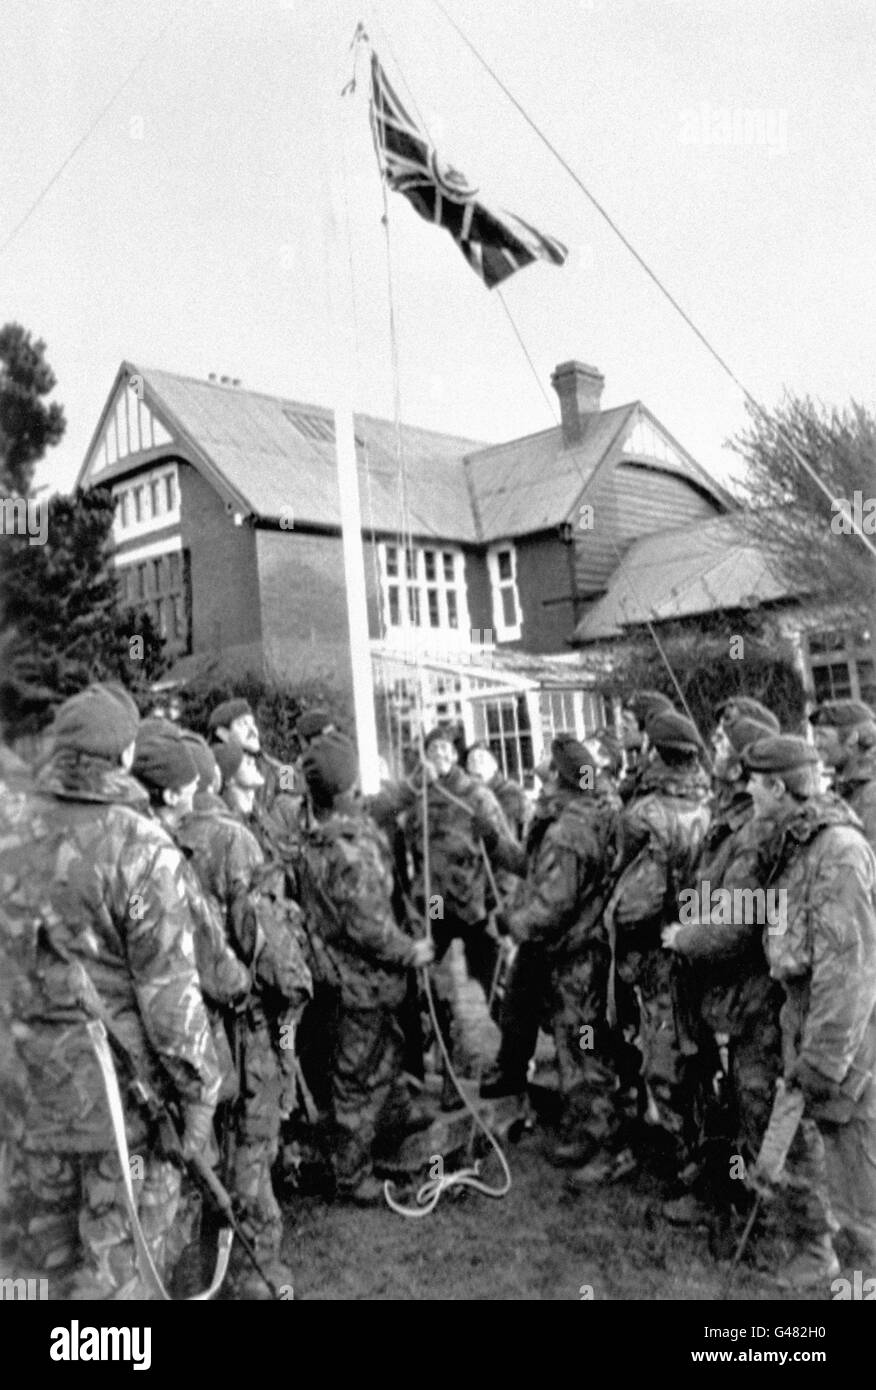 Royal Marines raise the Union flag again at Government House in Port Stanley on the 14/06/82 after the surrender of the Argentine forces in the Falklands war. * 15/6/97 Baroness Thatcher was unveiling a plaque in memory of British servicemen who died in the Falklands war, which ended 15 years ago (14/6/97). She was attending a cermony in Gosport, Hants and unveiling the plaque on the shores of the Solent, where thousands of friends and relatives waved farewell to the departing ships and welcomed their crews home. Stock Photo